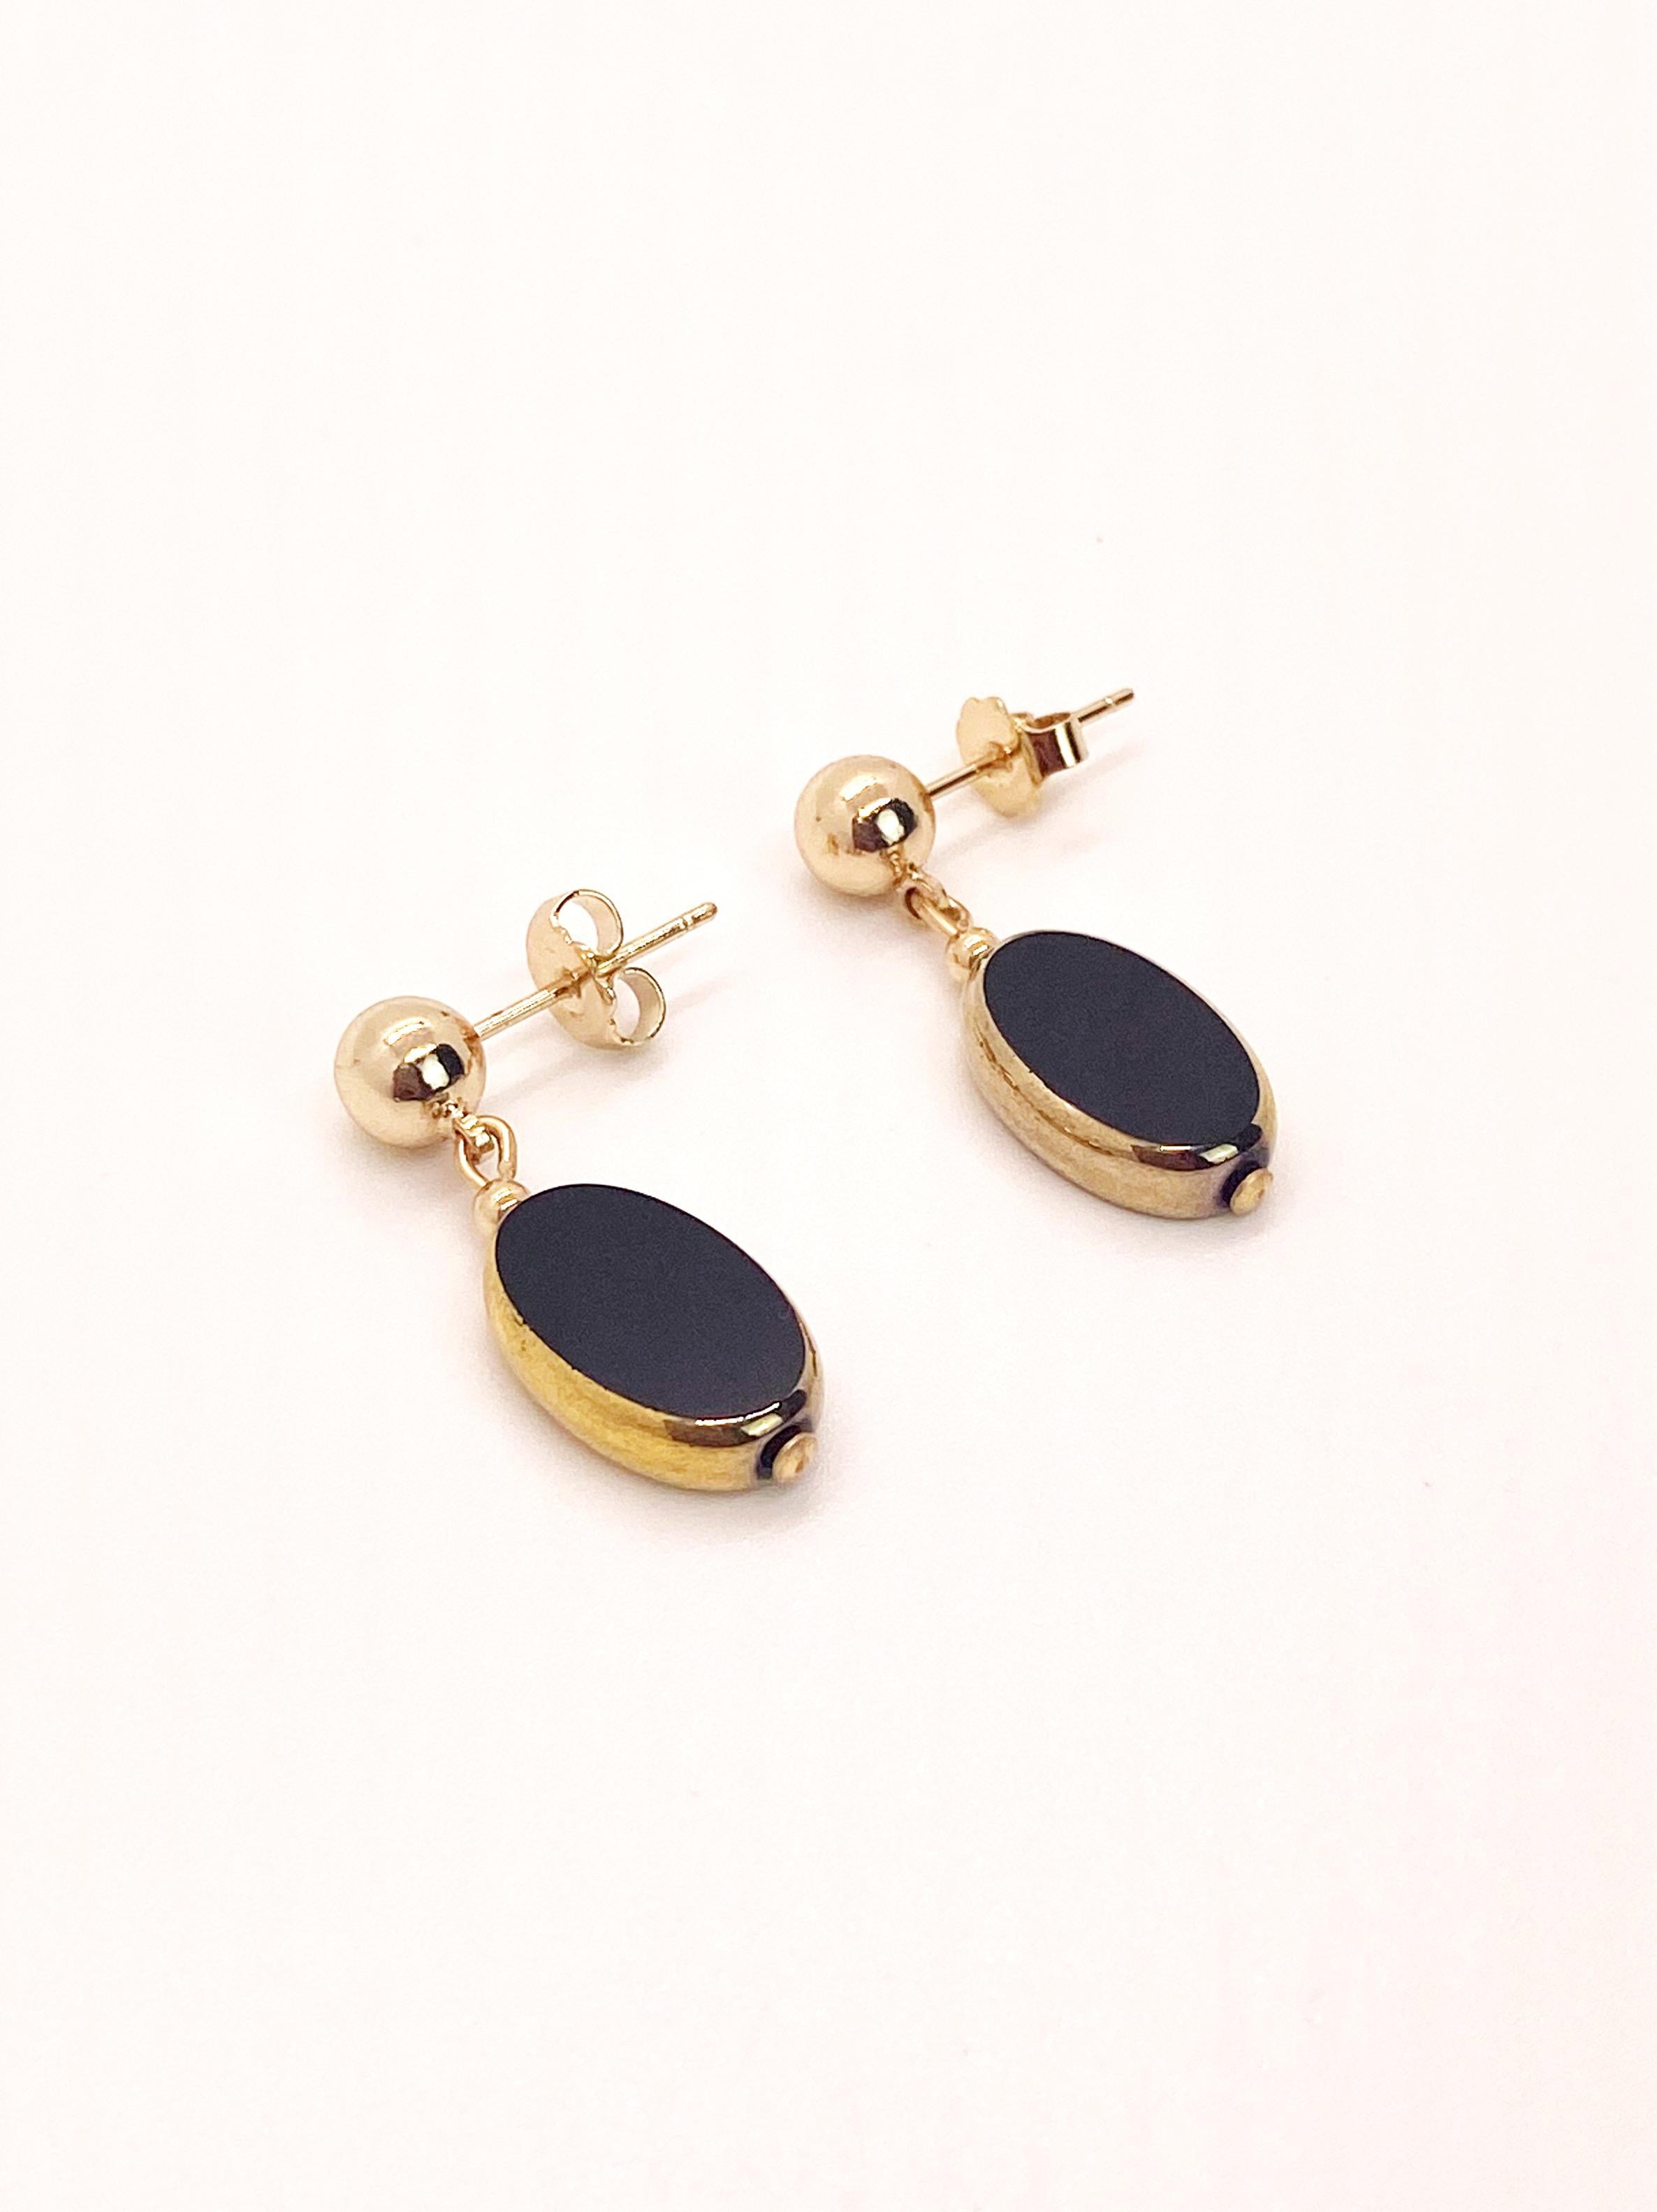 Black Oval German vintage glass beads edged with 24K gold dangles on a 6mm ball 14K gold filled earring post. 

The German vintage glass beads are considered rare and collectible, circa 1920s-1960s.

*Our jewelry have maximum protection for